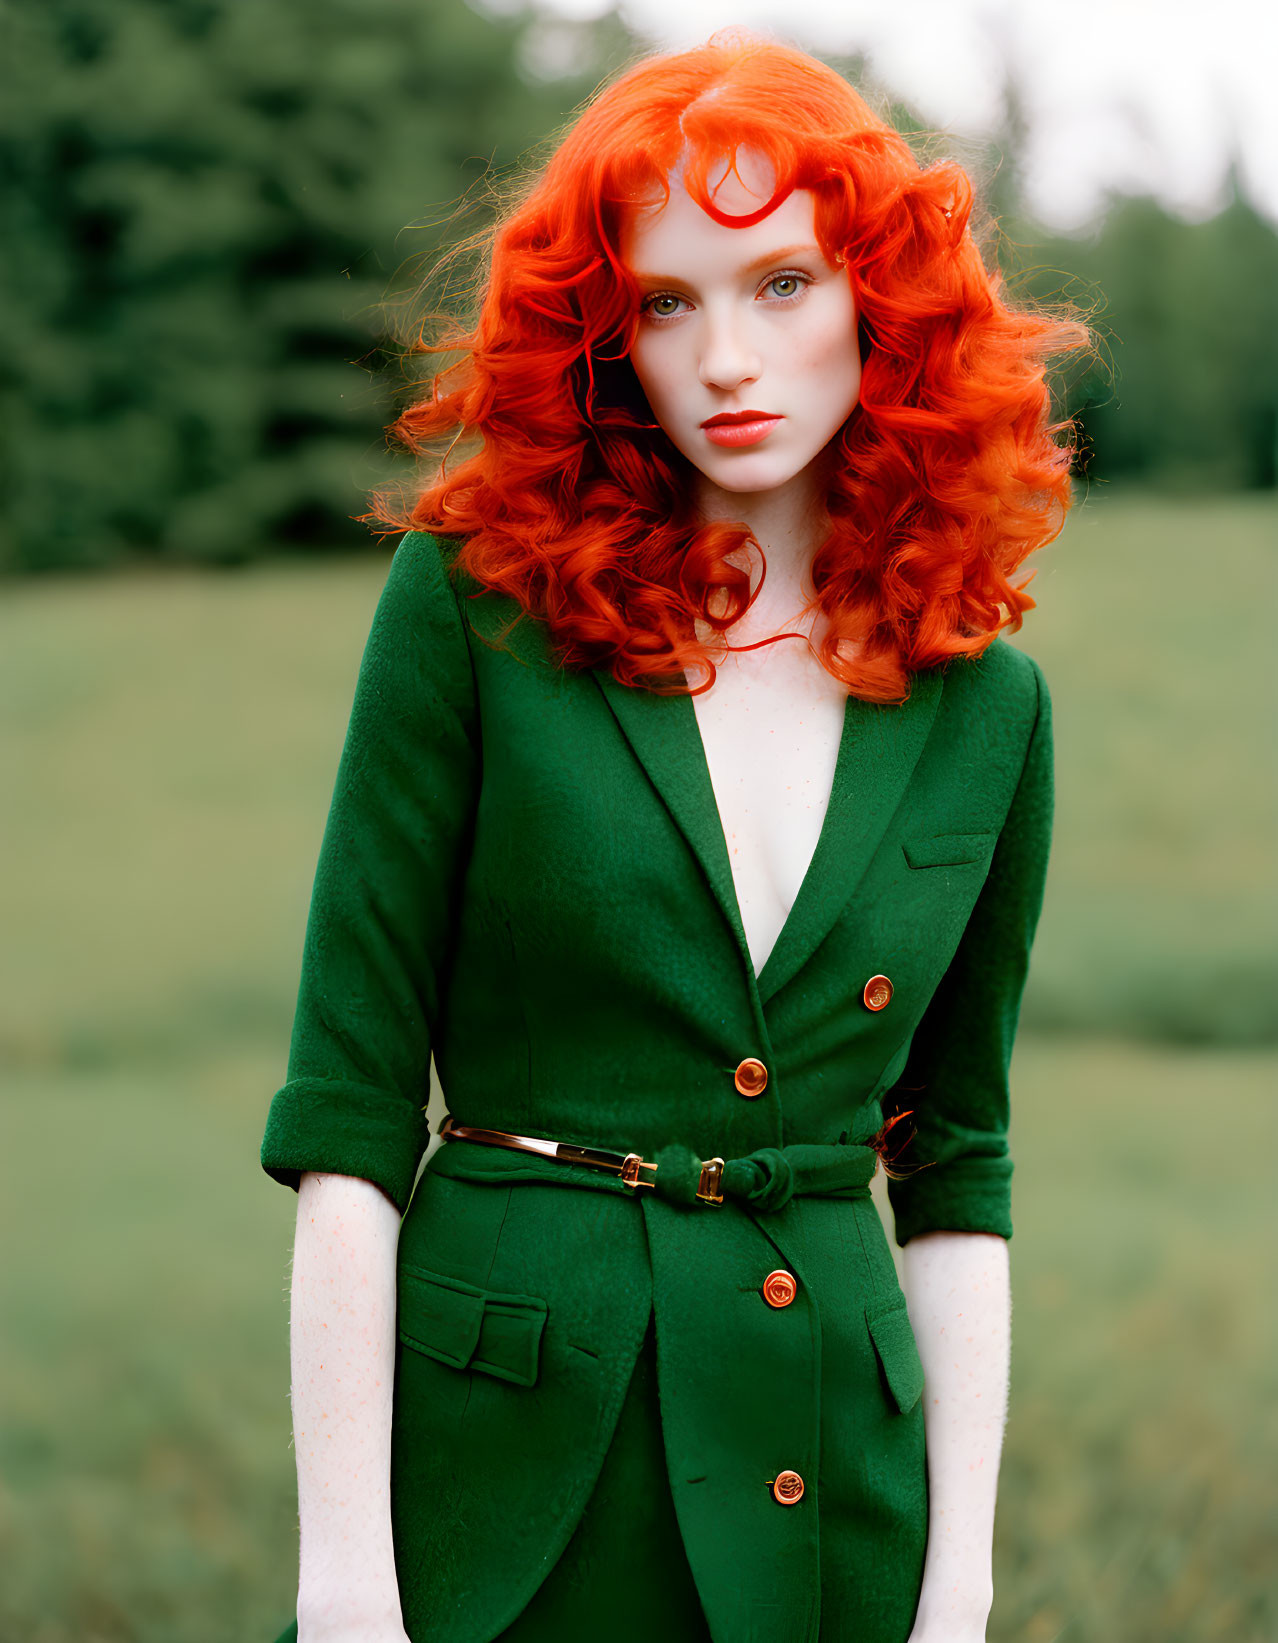 Vibrant red-haired person in green blazer dress outdoors